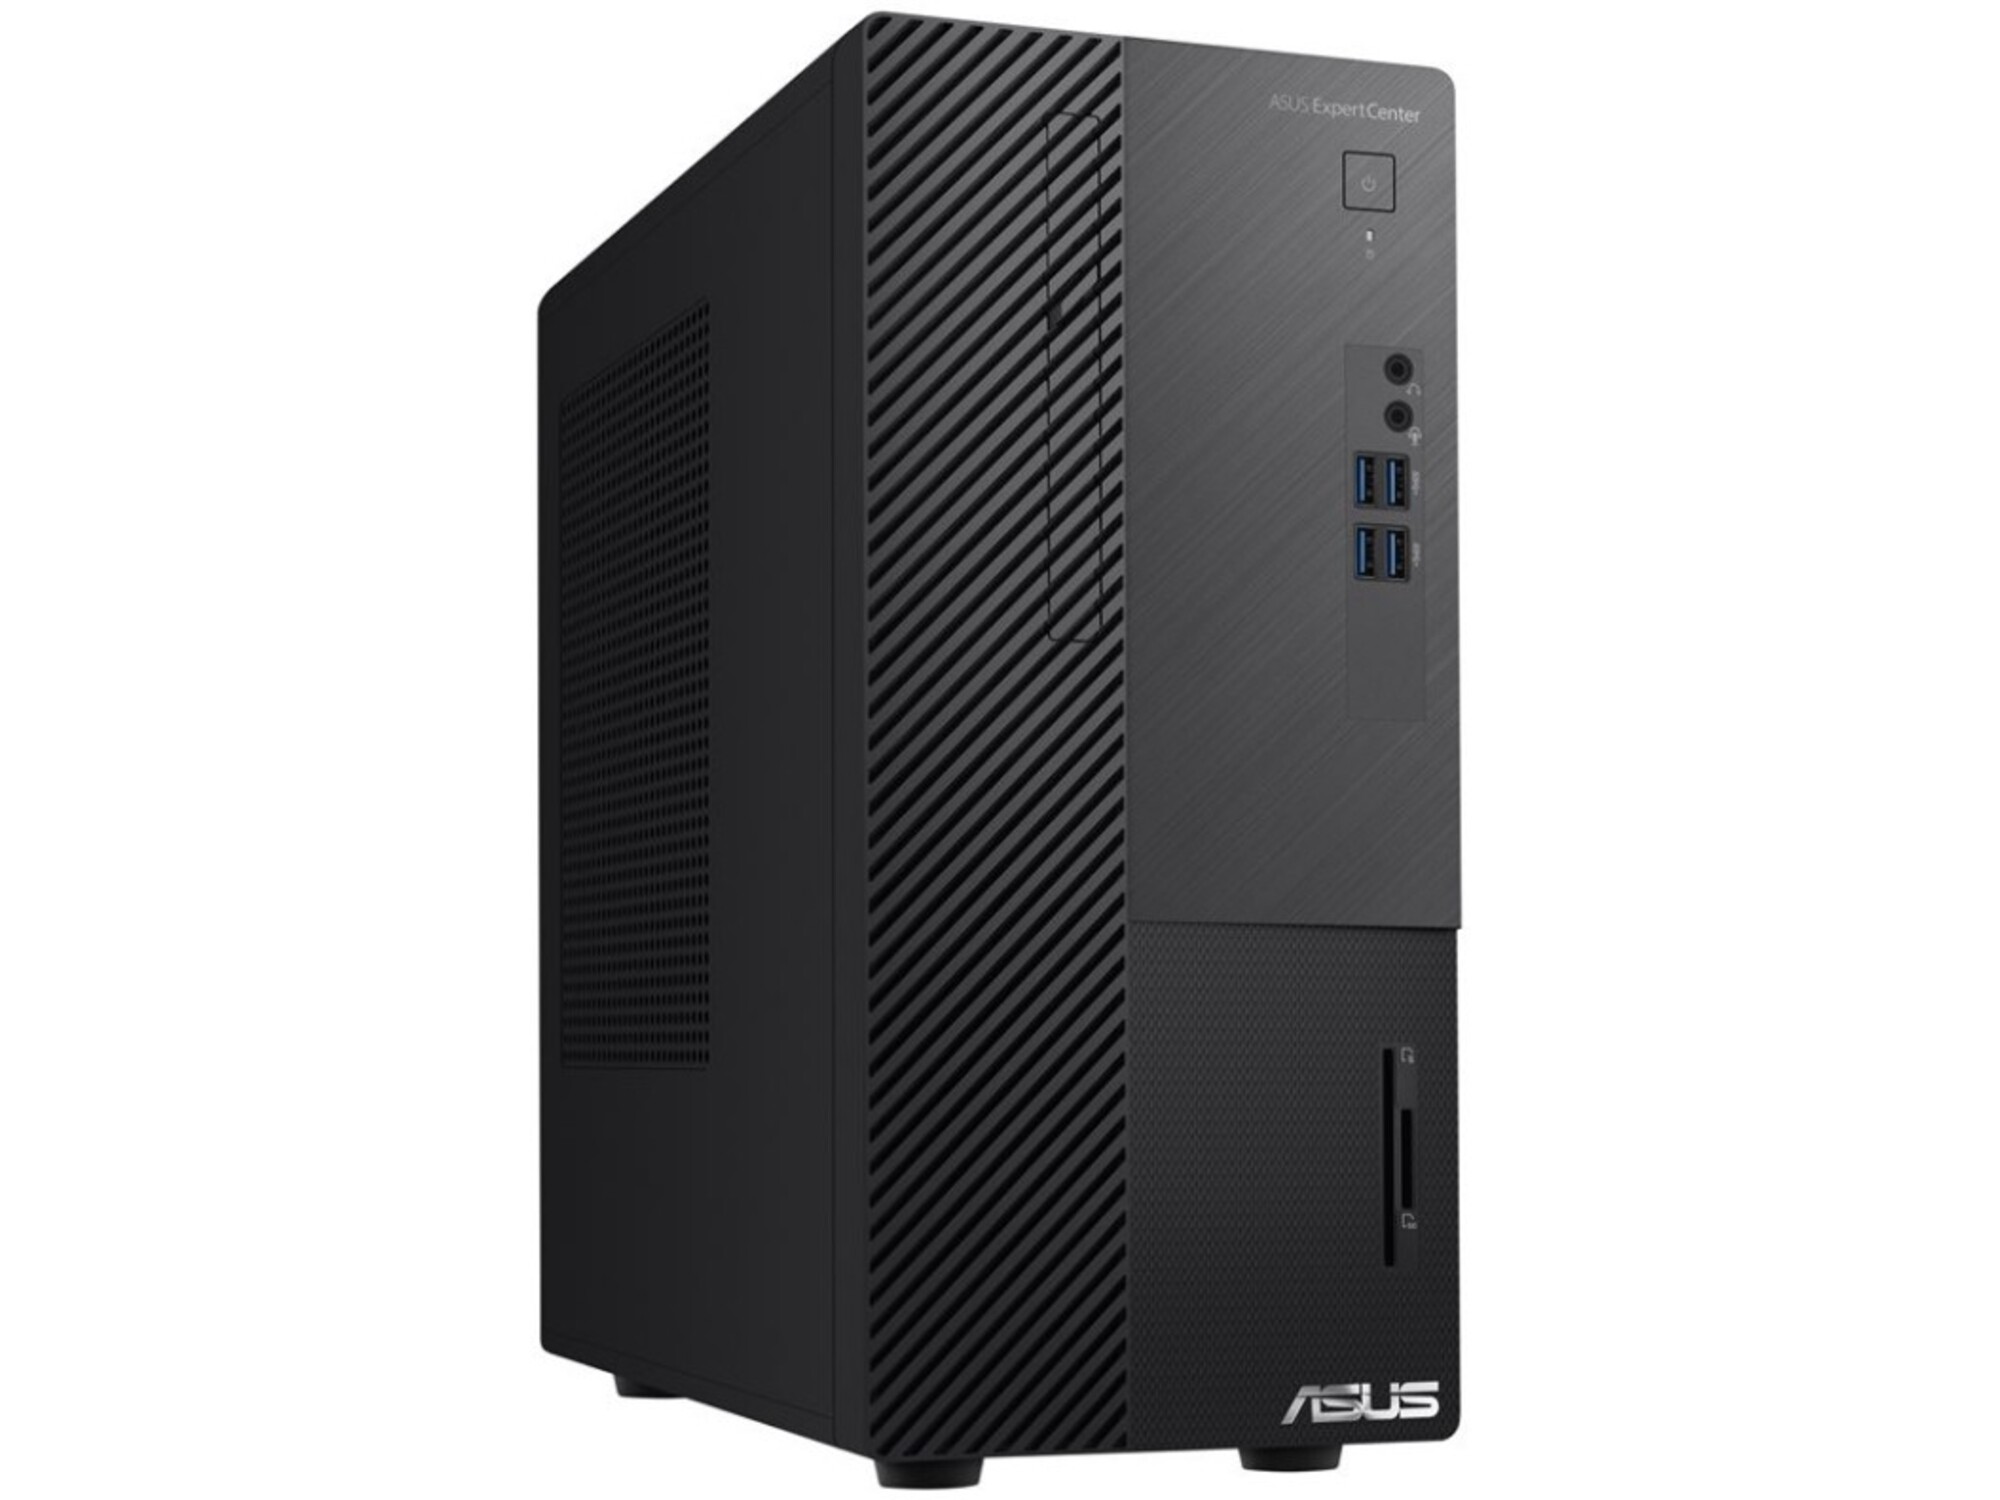 ASUS ExpertCenter D5 Mini Tower D500MAES 310100007R/MT/Core i3 10100 3,6 GHz/8 GB/SSD 256 GB 90PF0241-M09830